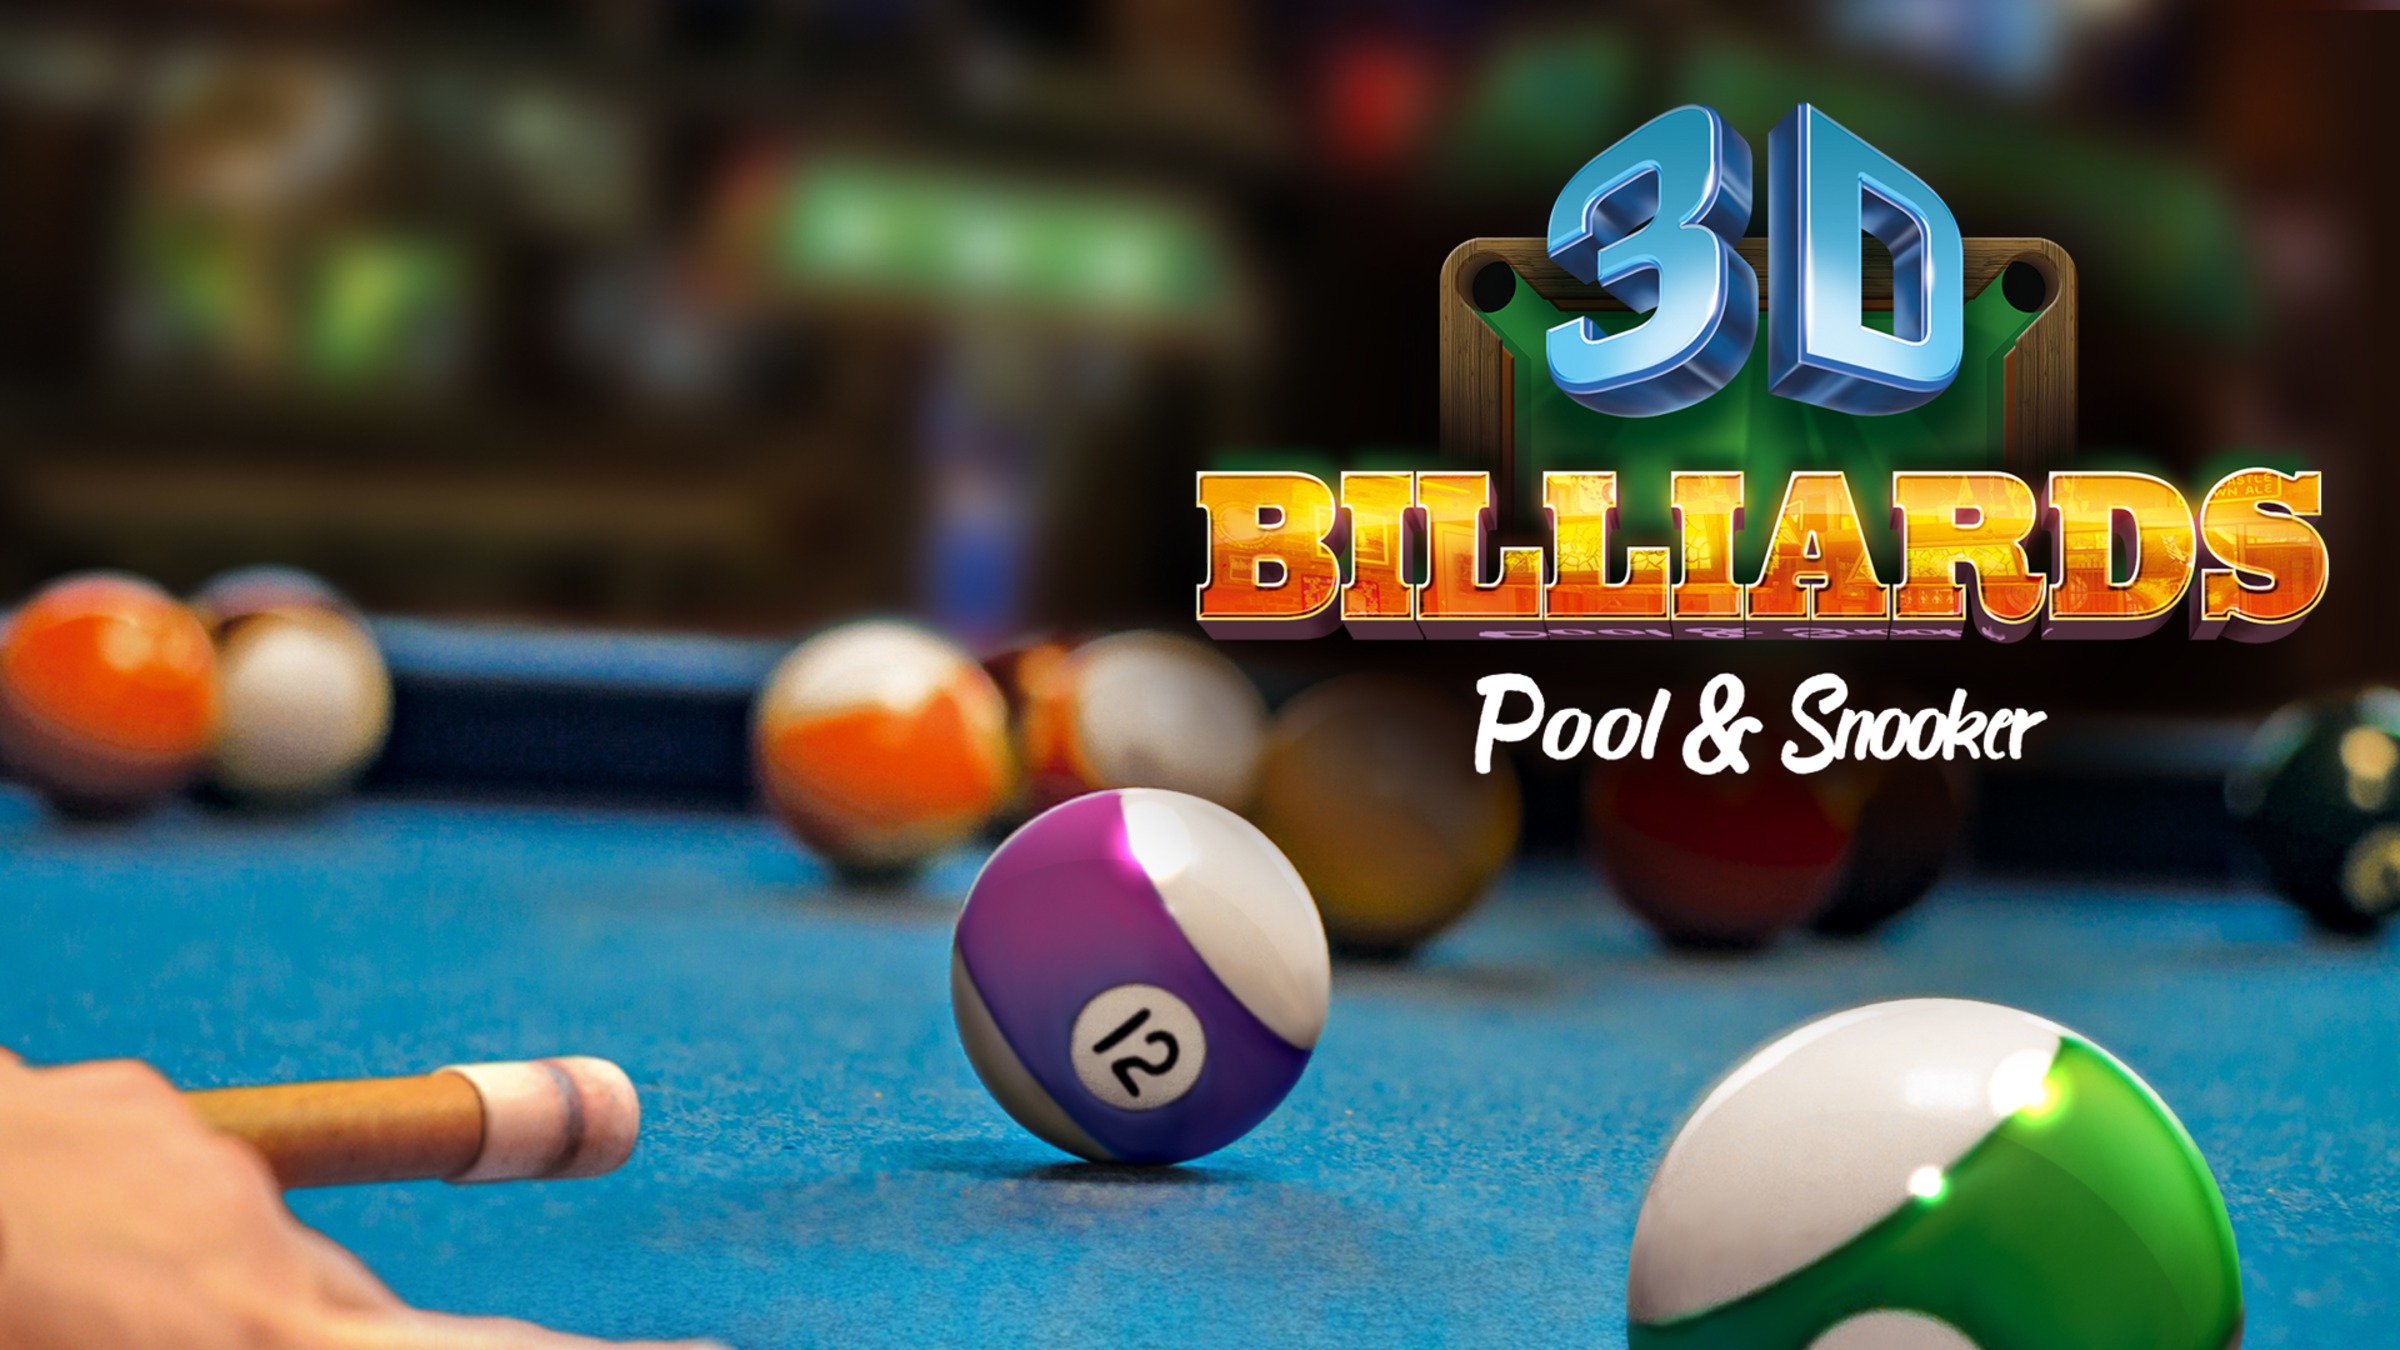 3D Billiards - Pool and Snooker for Nintendo Switch